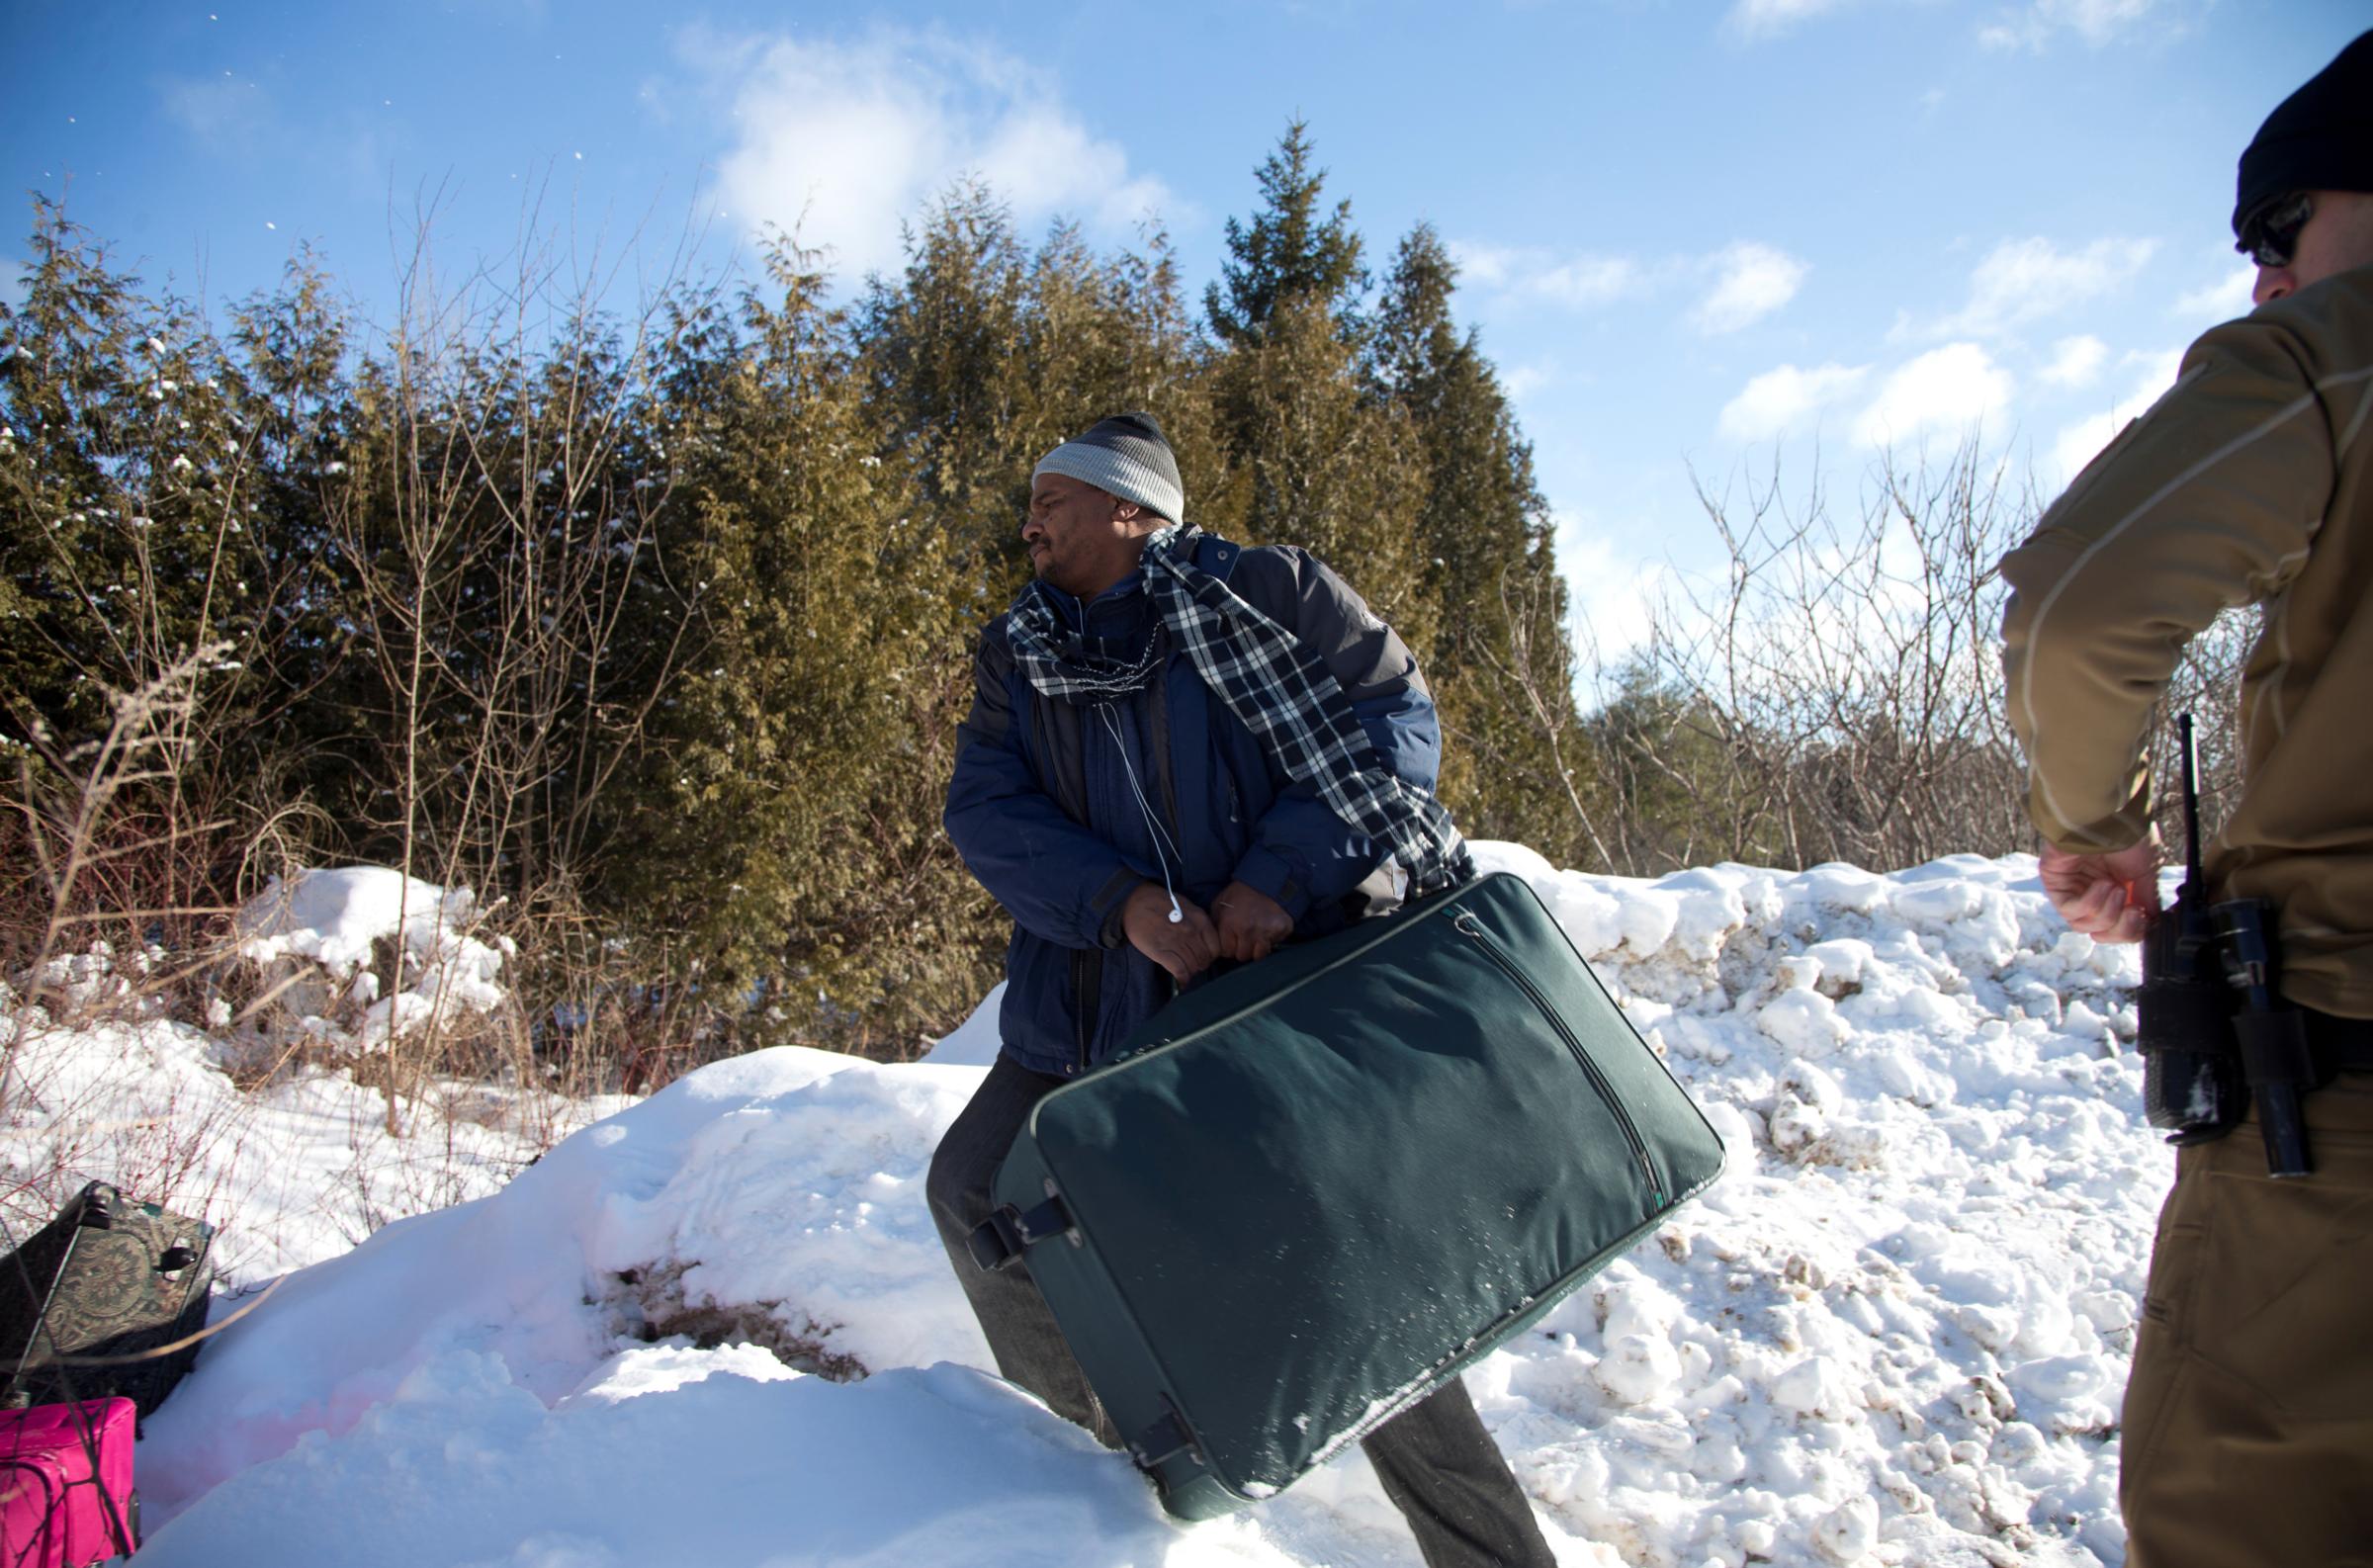 A man who claimed to be from Sudan throws his family's suitcases towards the border as he is detained by a U.S. border patrol officer after his family crossed the U.S.-Canada border into Hemmingford, Canada, from Champlain in New York, U.S., February 17, 2017. REUTERS/Christinne Muschi - RTSZ6NV